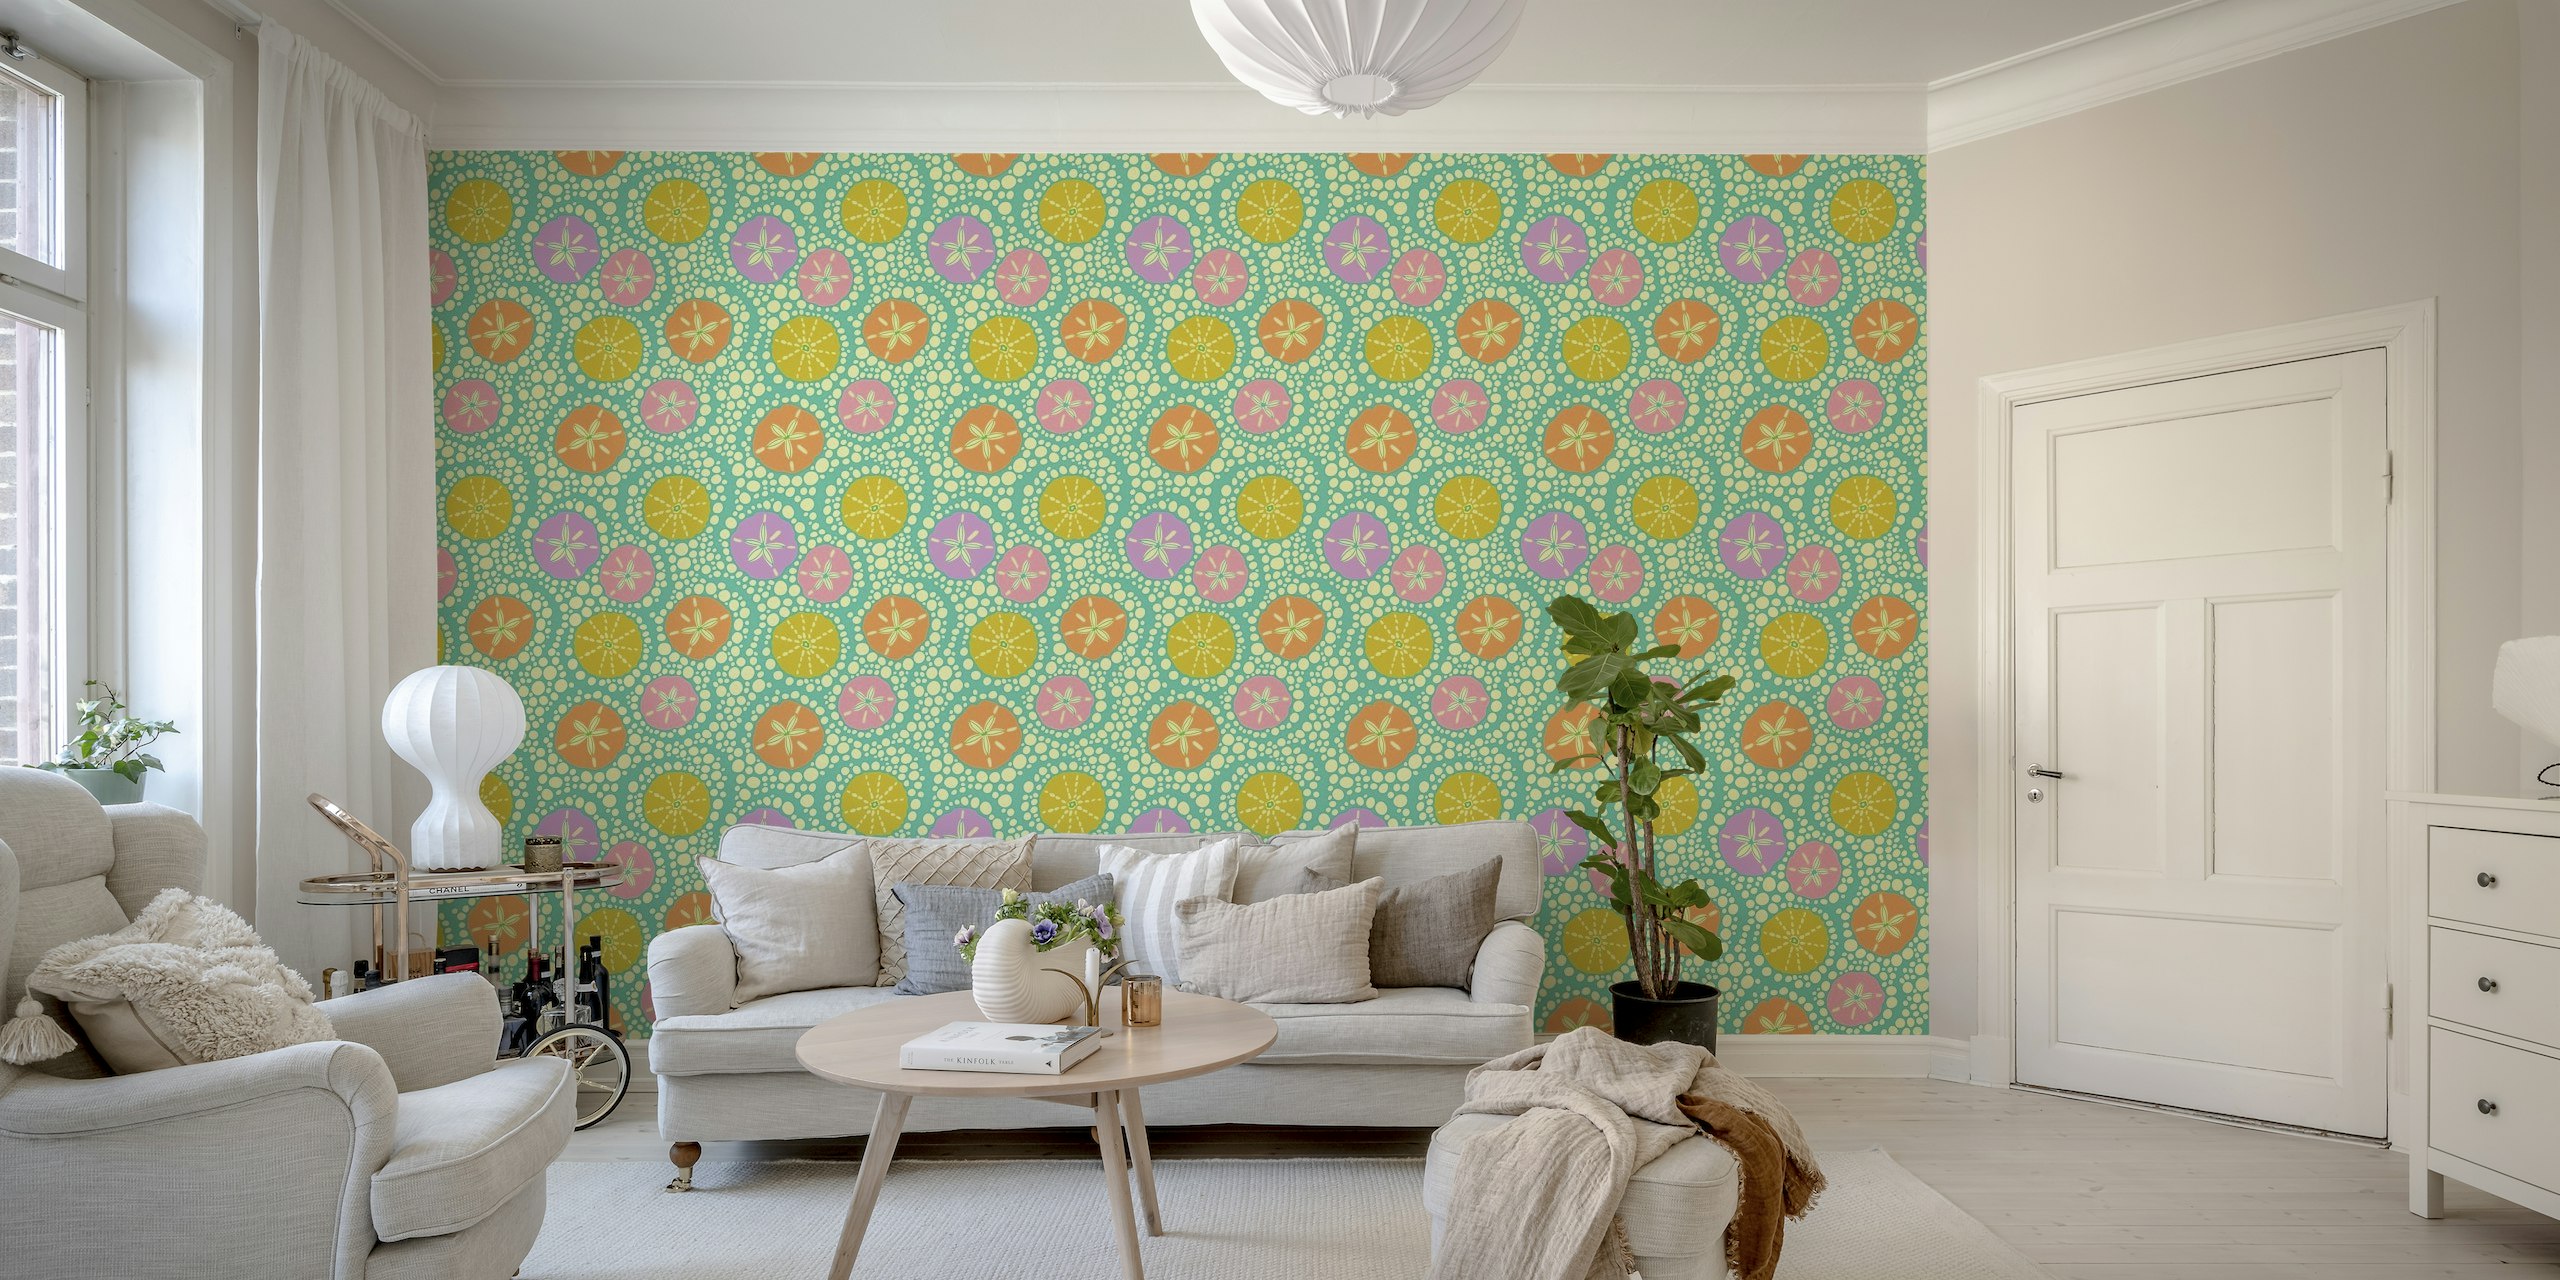 Coastal beach-inspired wall mural with sea urchins and sand dollars on a teal background